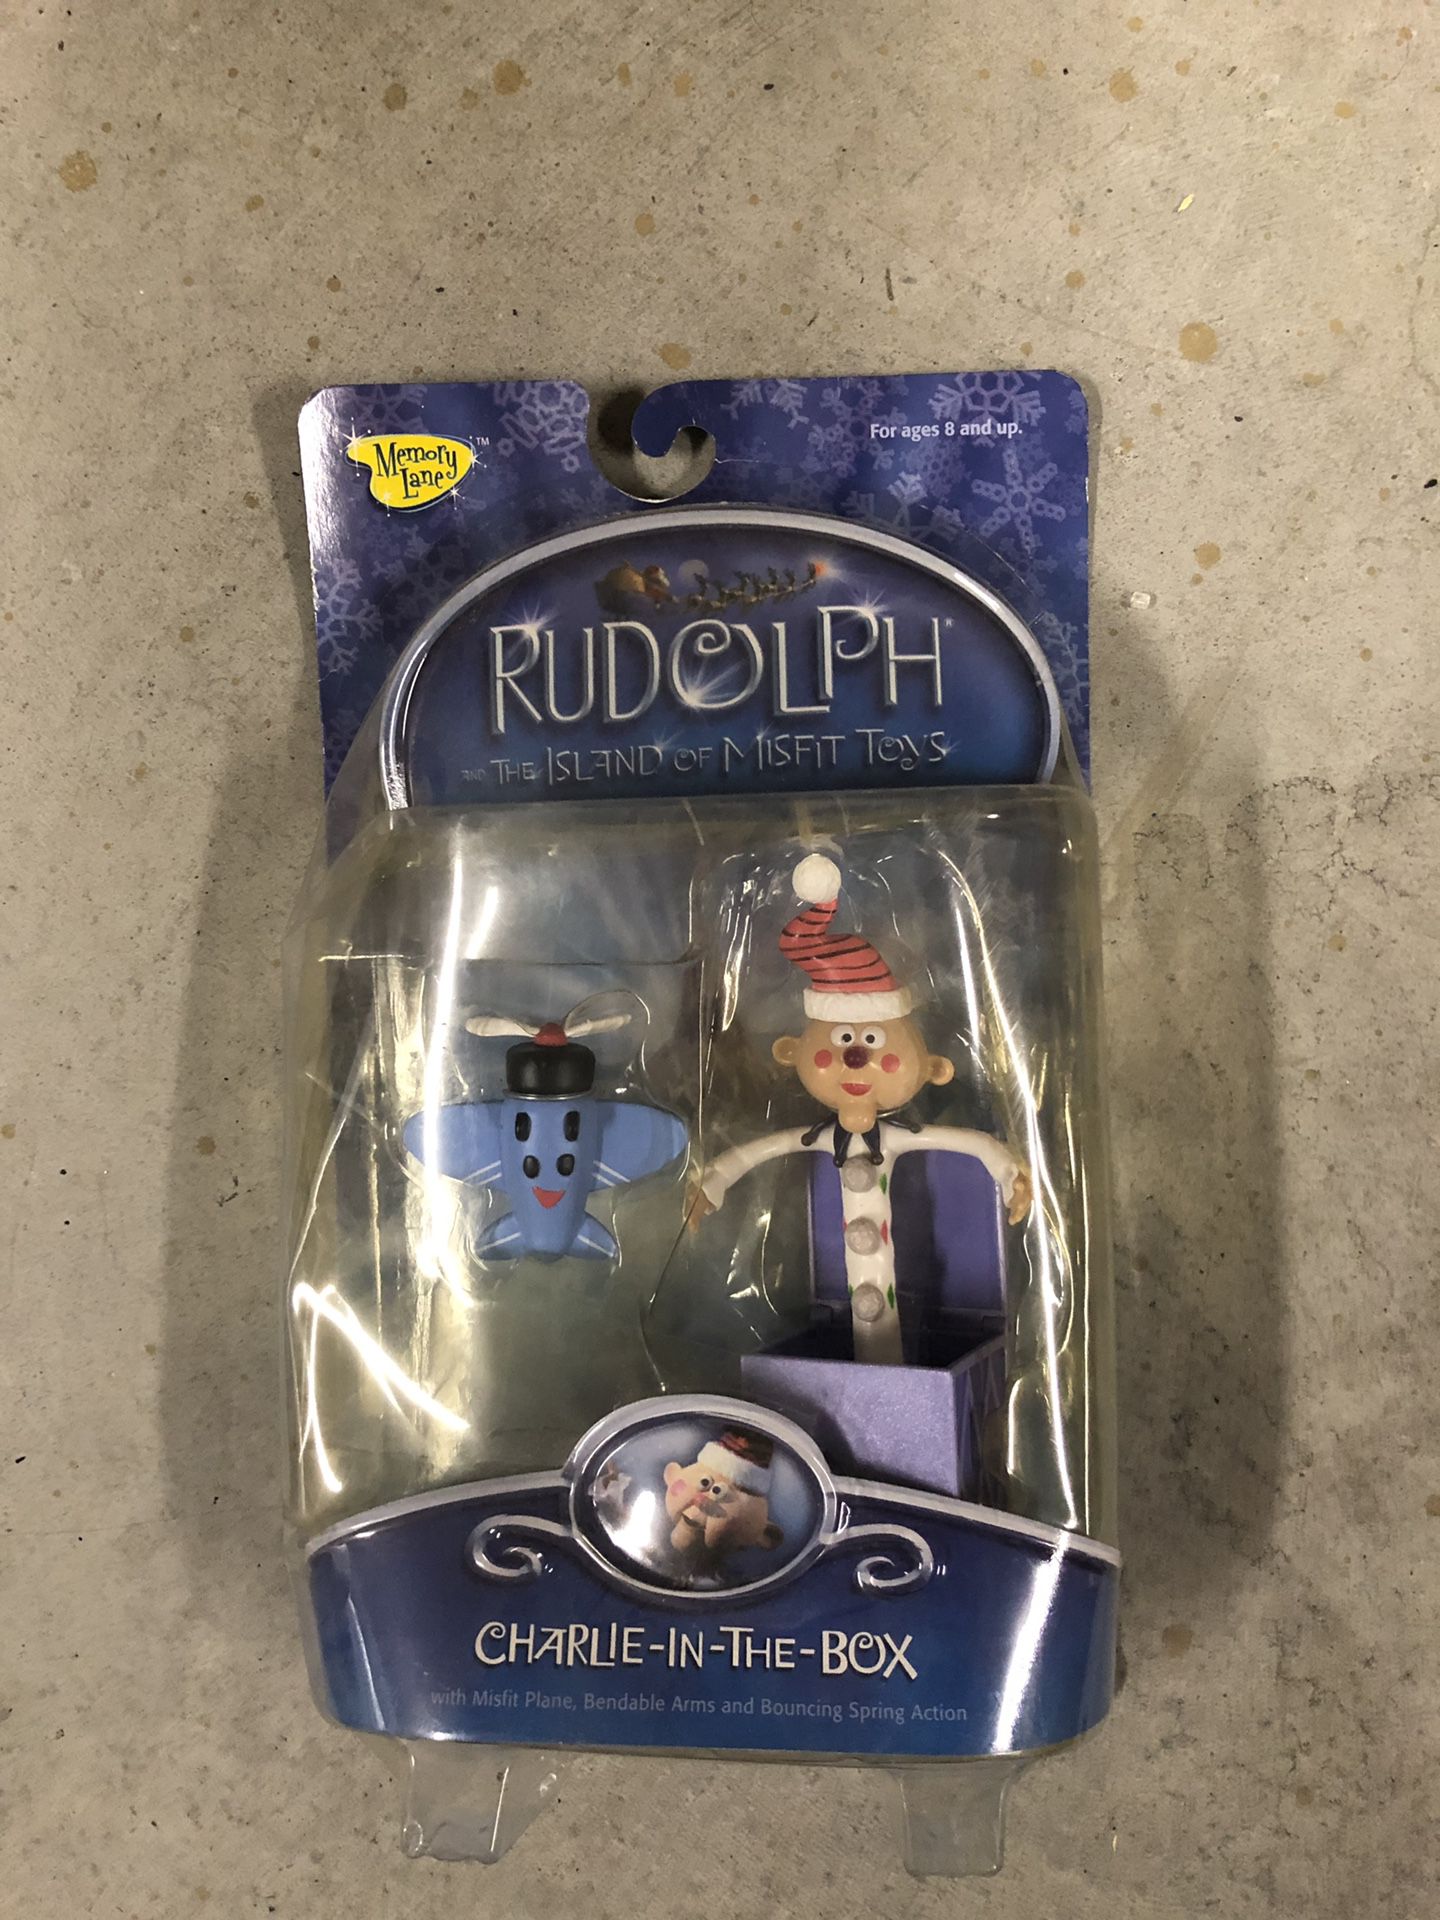 Collectible NIB Rudolph’s Charlie-in-the-Box